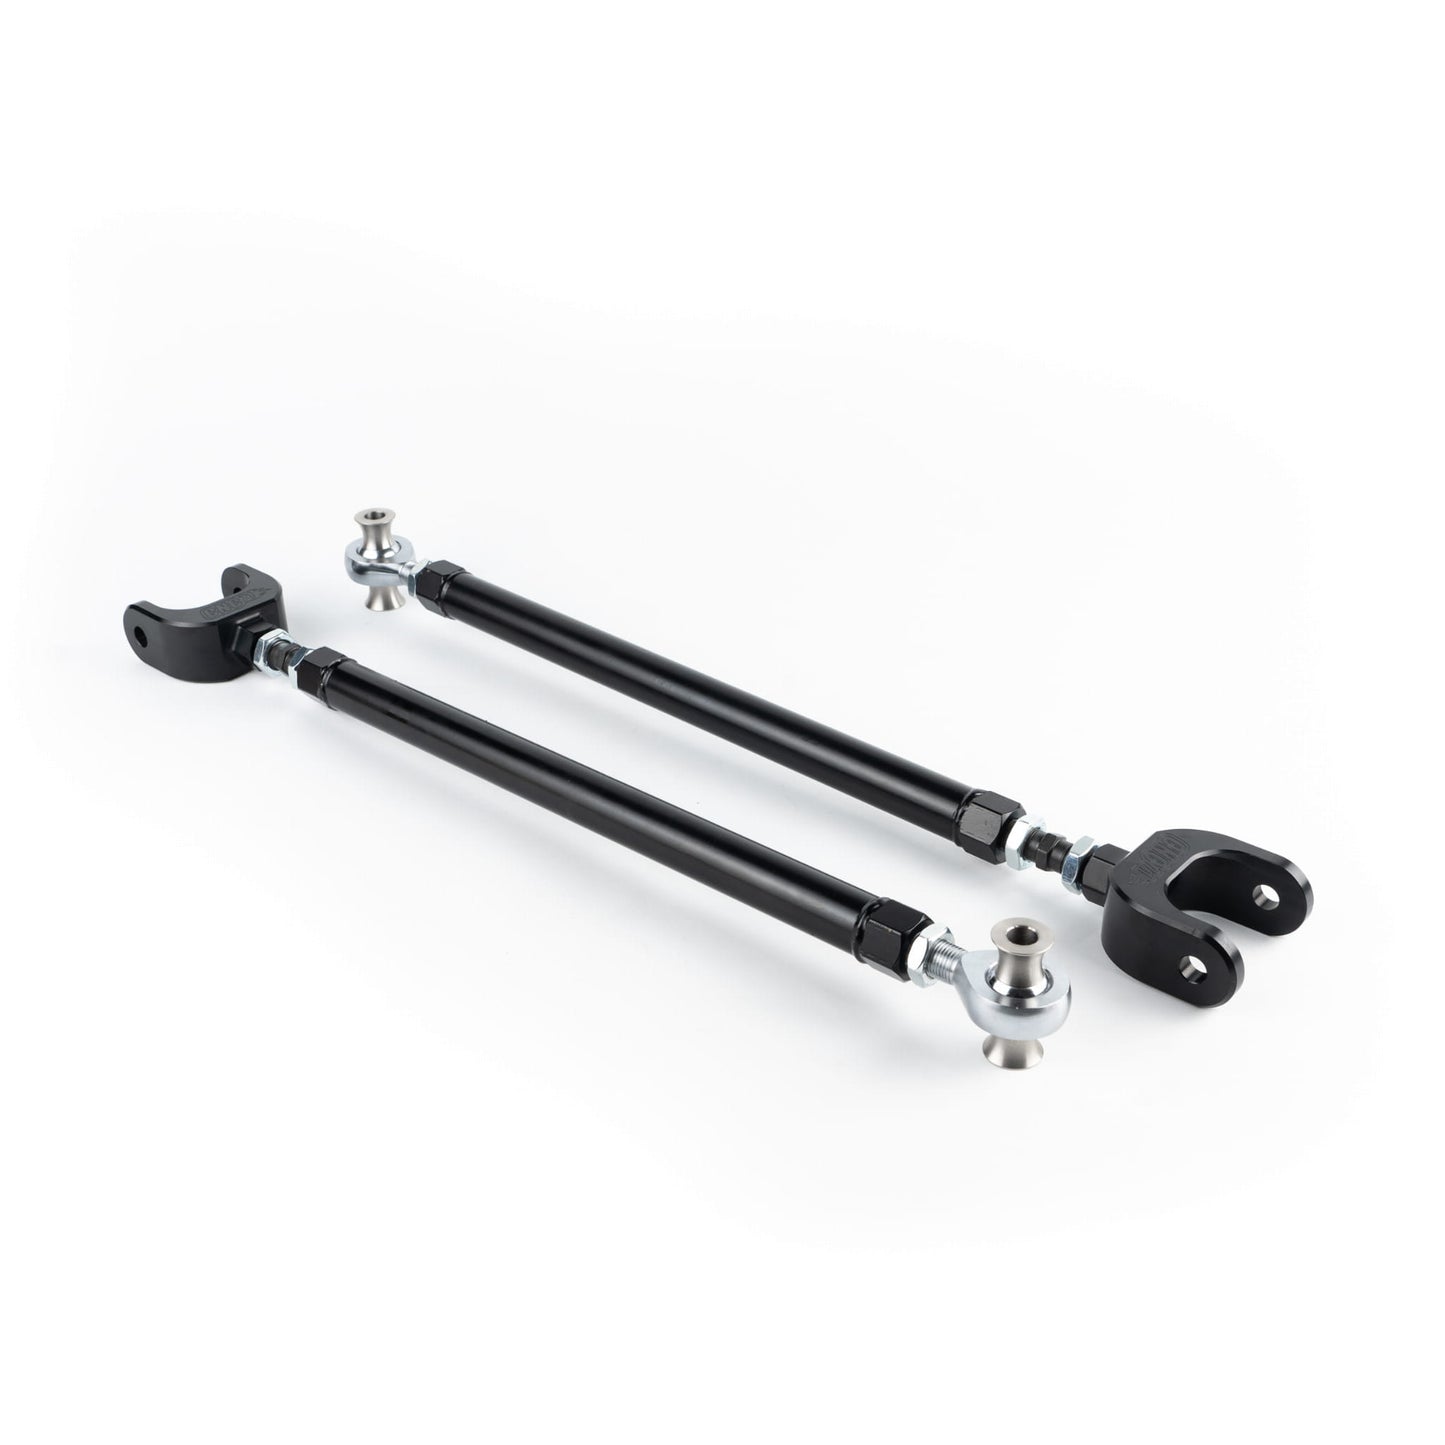 CNC71 - ADJUSTABLE REAR LOWER CONTROL ARMS BMW E36/E46 - MACHINED